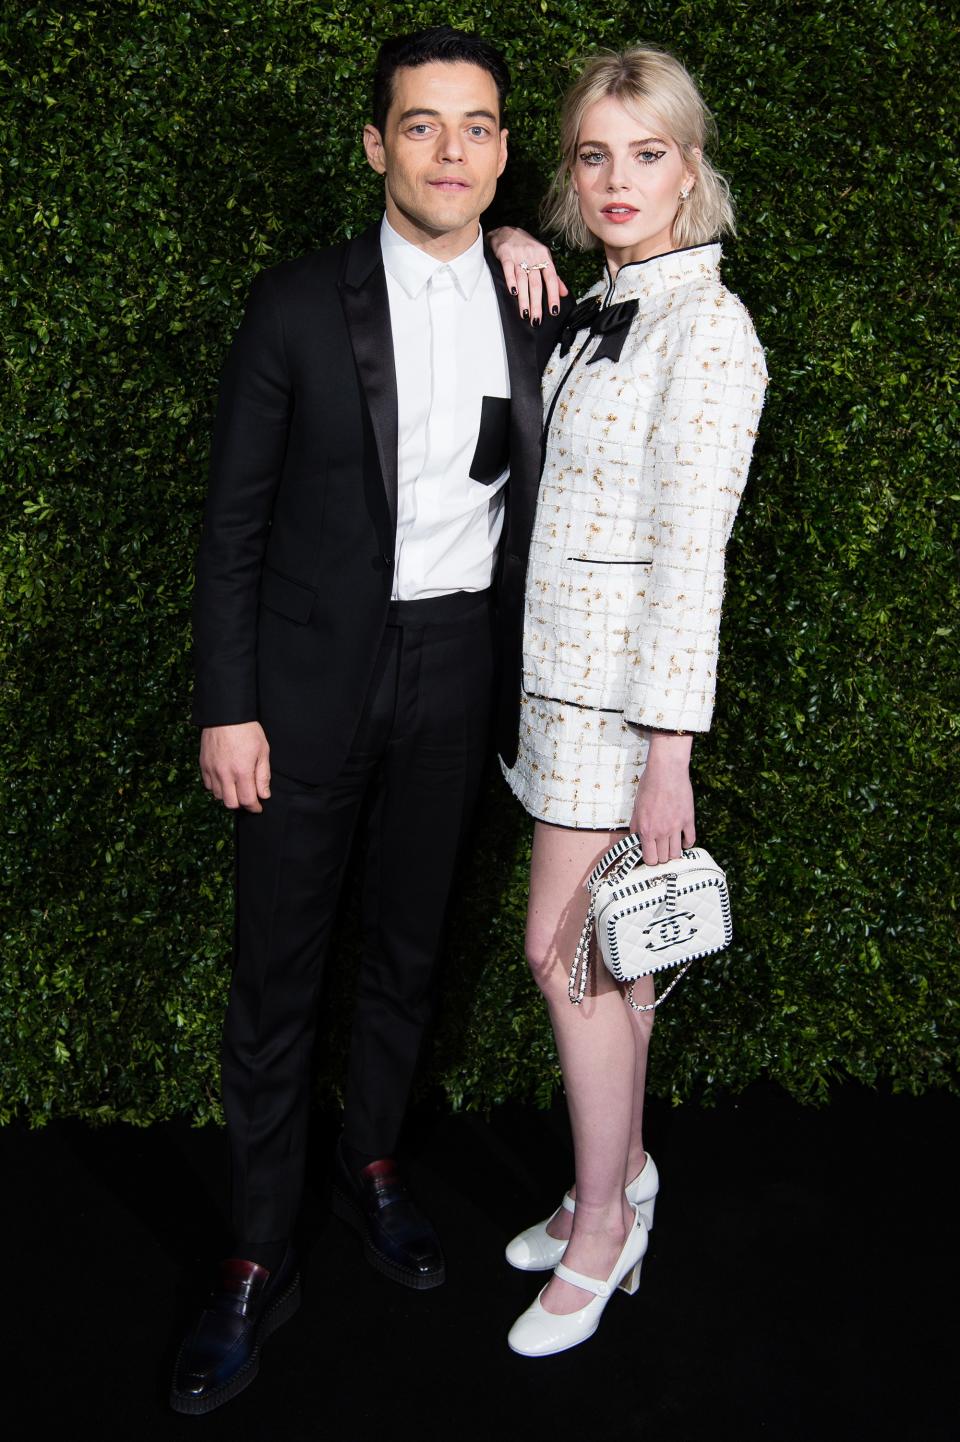 Rami Malek and Lucy Boynton attend the Charles Finch & Chanel pre-Bafta dinner at Loulou’s